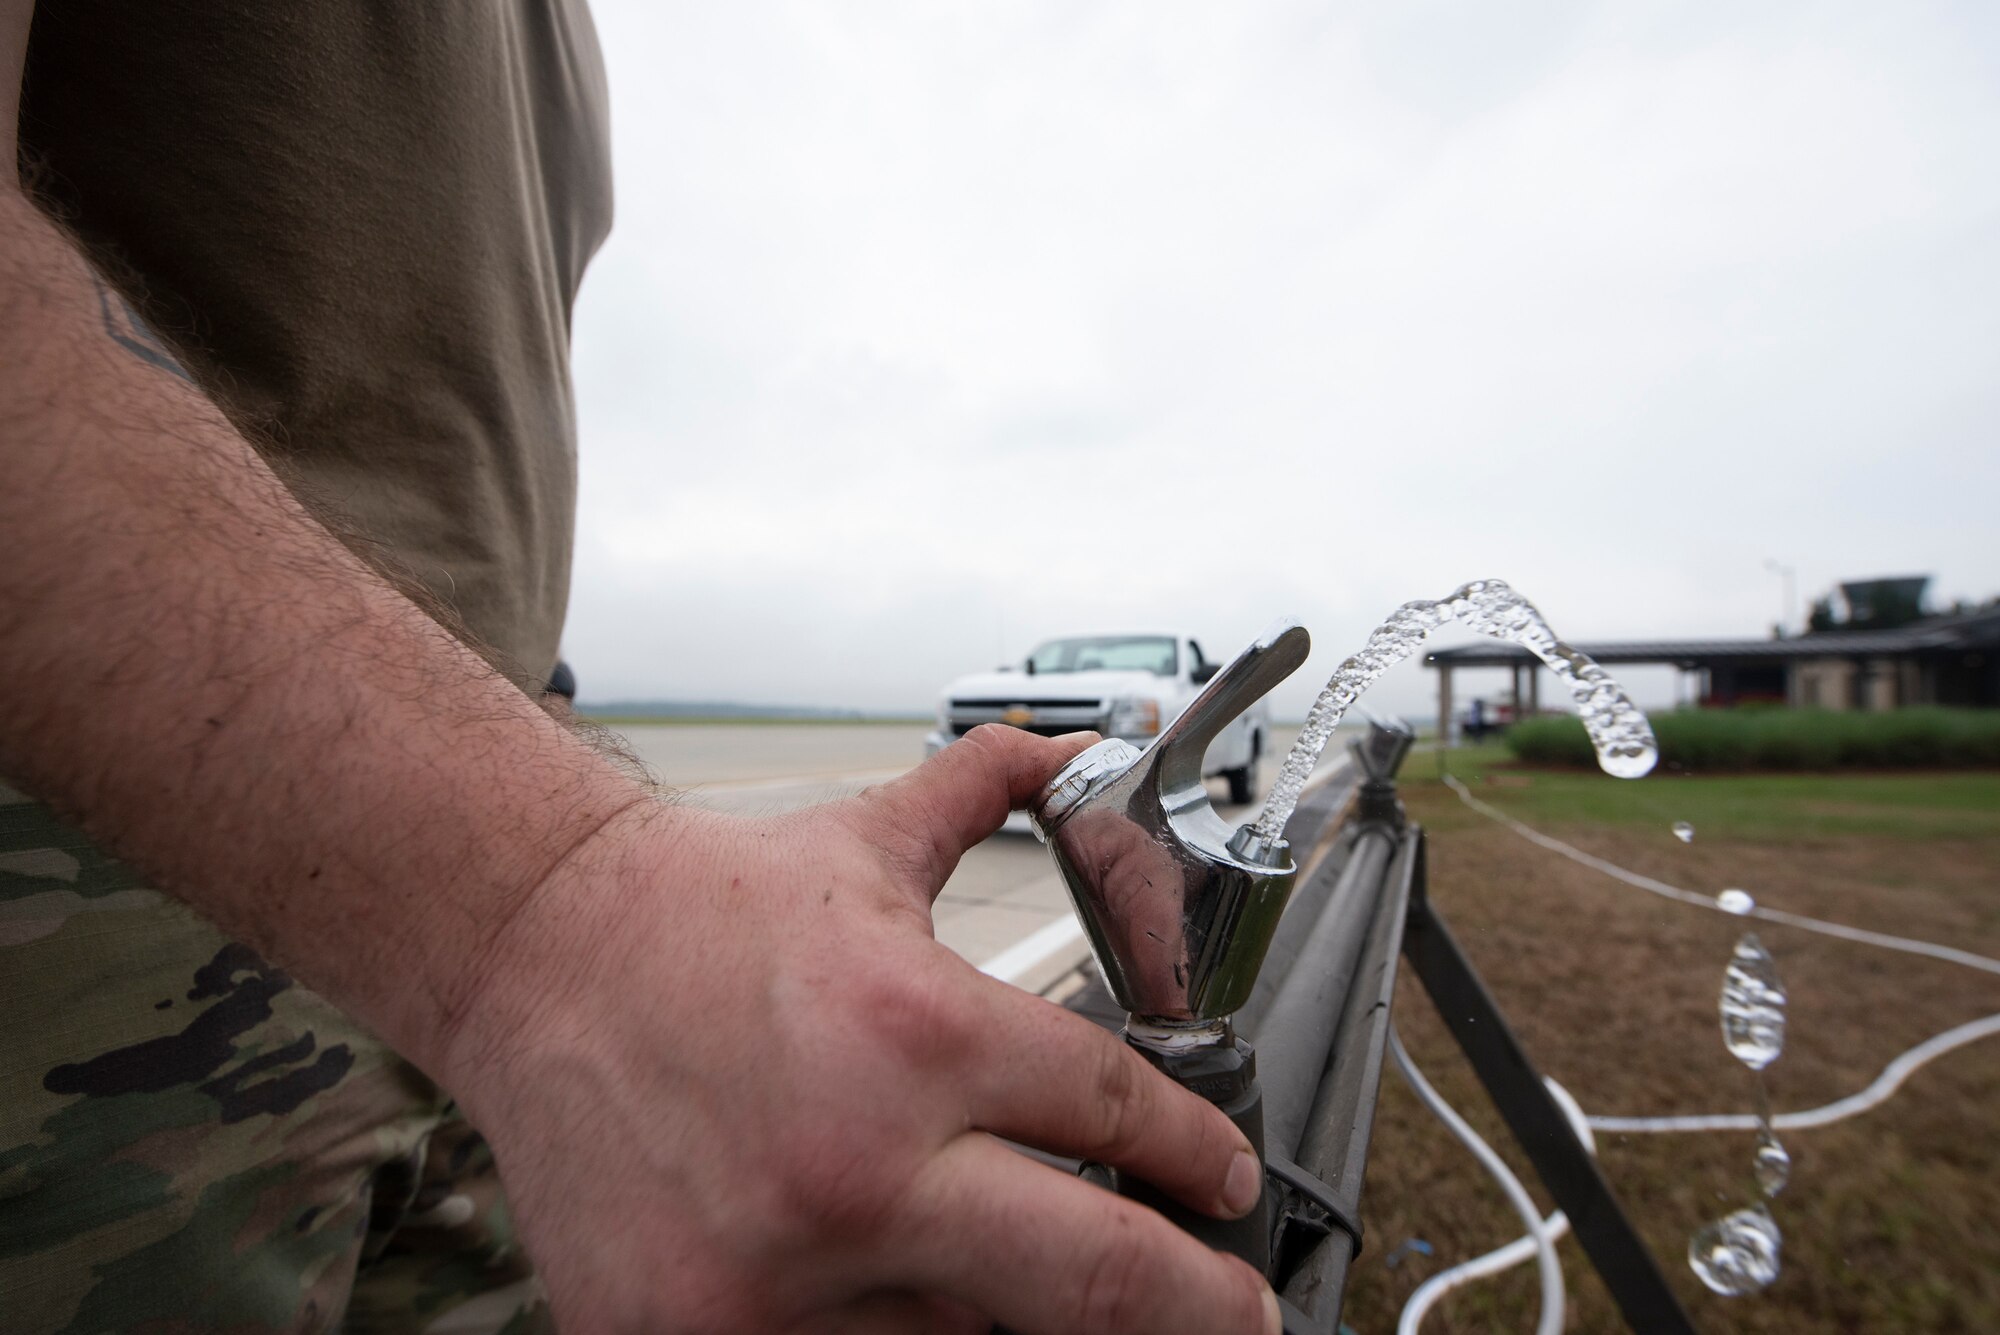 Staff Sgt. Douglas Shaw, 23d Civil Engineer Squadron (CES) water and fuel systems maintenance journeyman, tests a water fountain’s functionality Oct. 29, 2019, at Moody Air Force Base, Ga. The 23d CES installed water fountains around the flightline in preparation for the air show. This will give air show attendees locations for clean water and help with dehydration related injuries. (U.S. Air Force photo by Airman Elijah Dority)